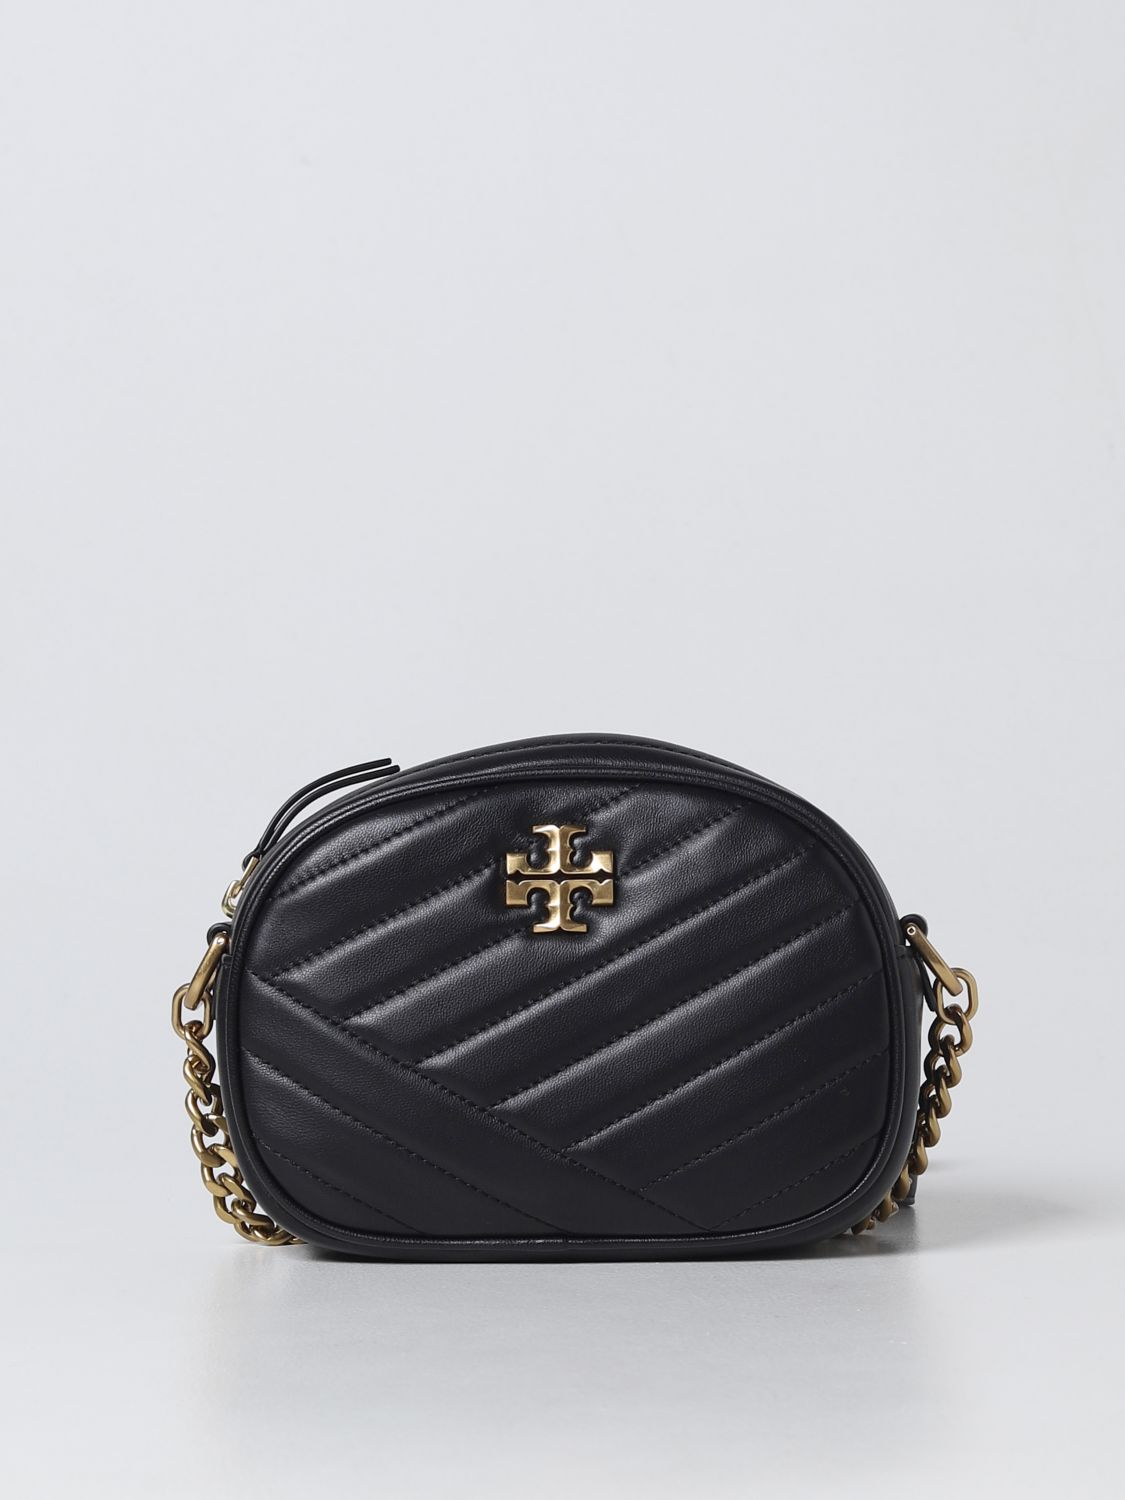 TORY BURCH: Kira bag in quilted leather - White  Tory Burch mini bag 90450  online at